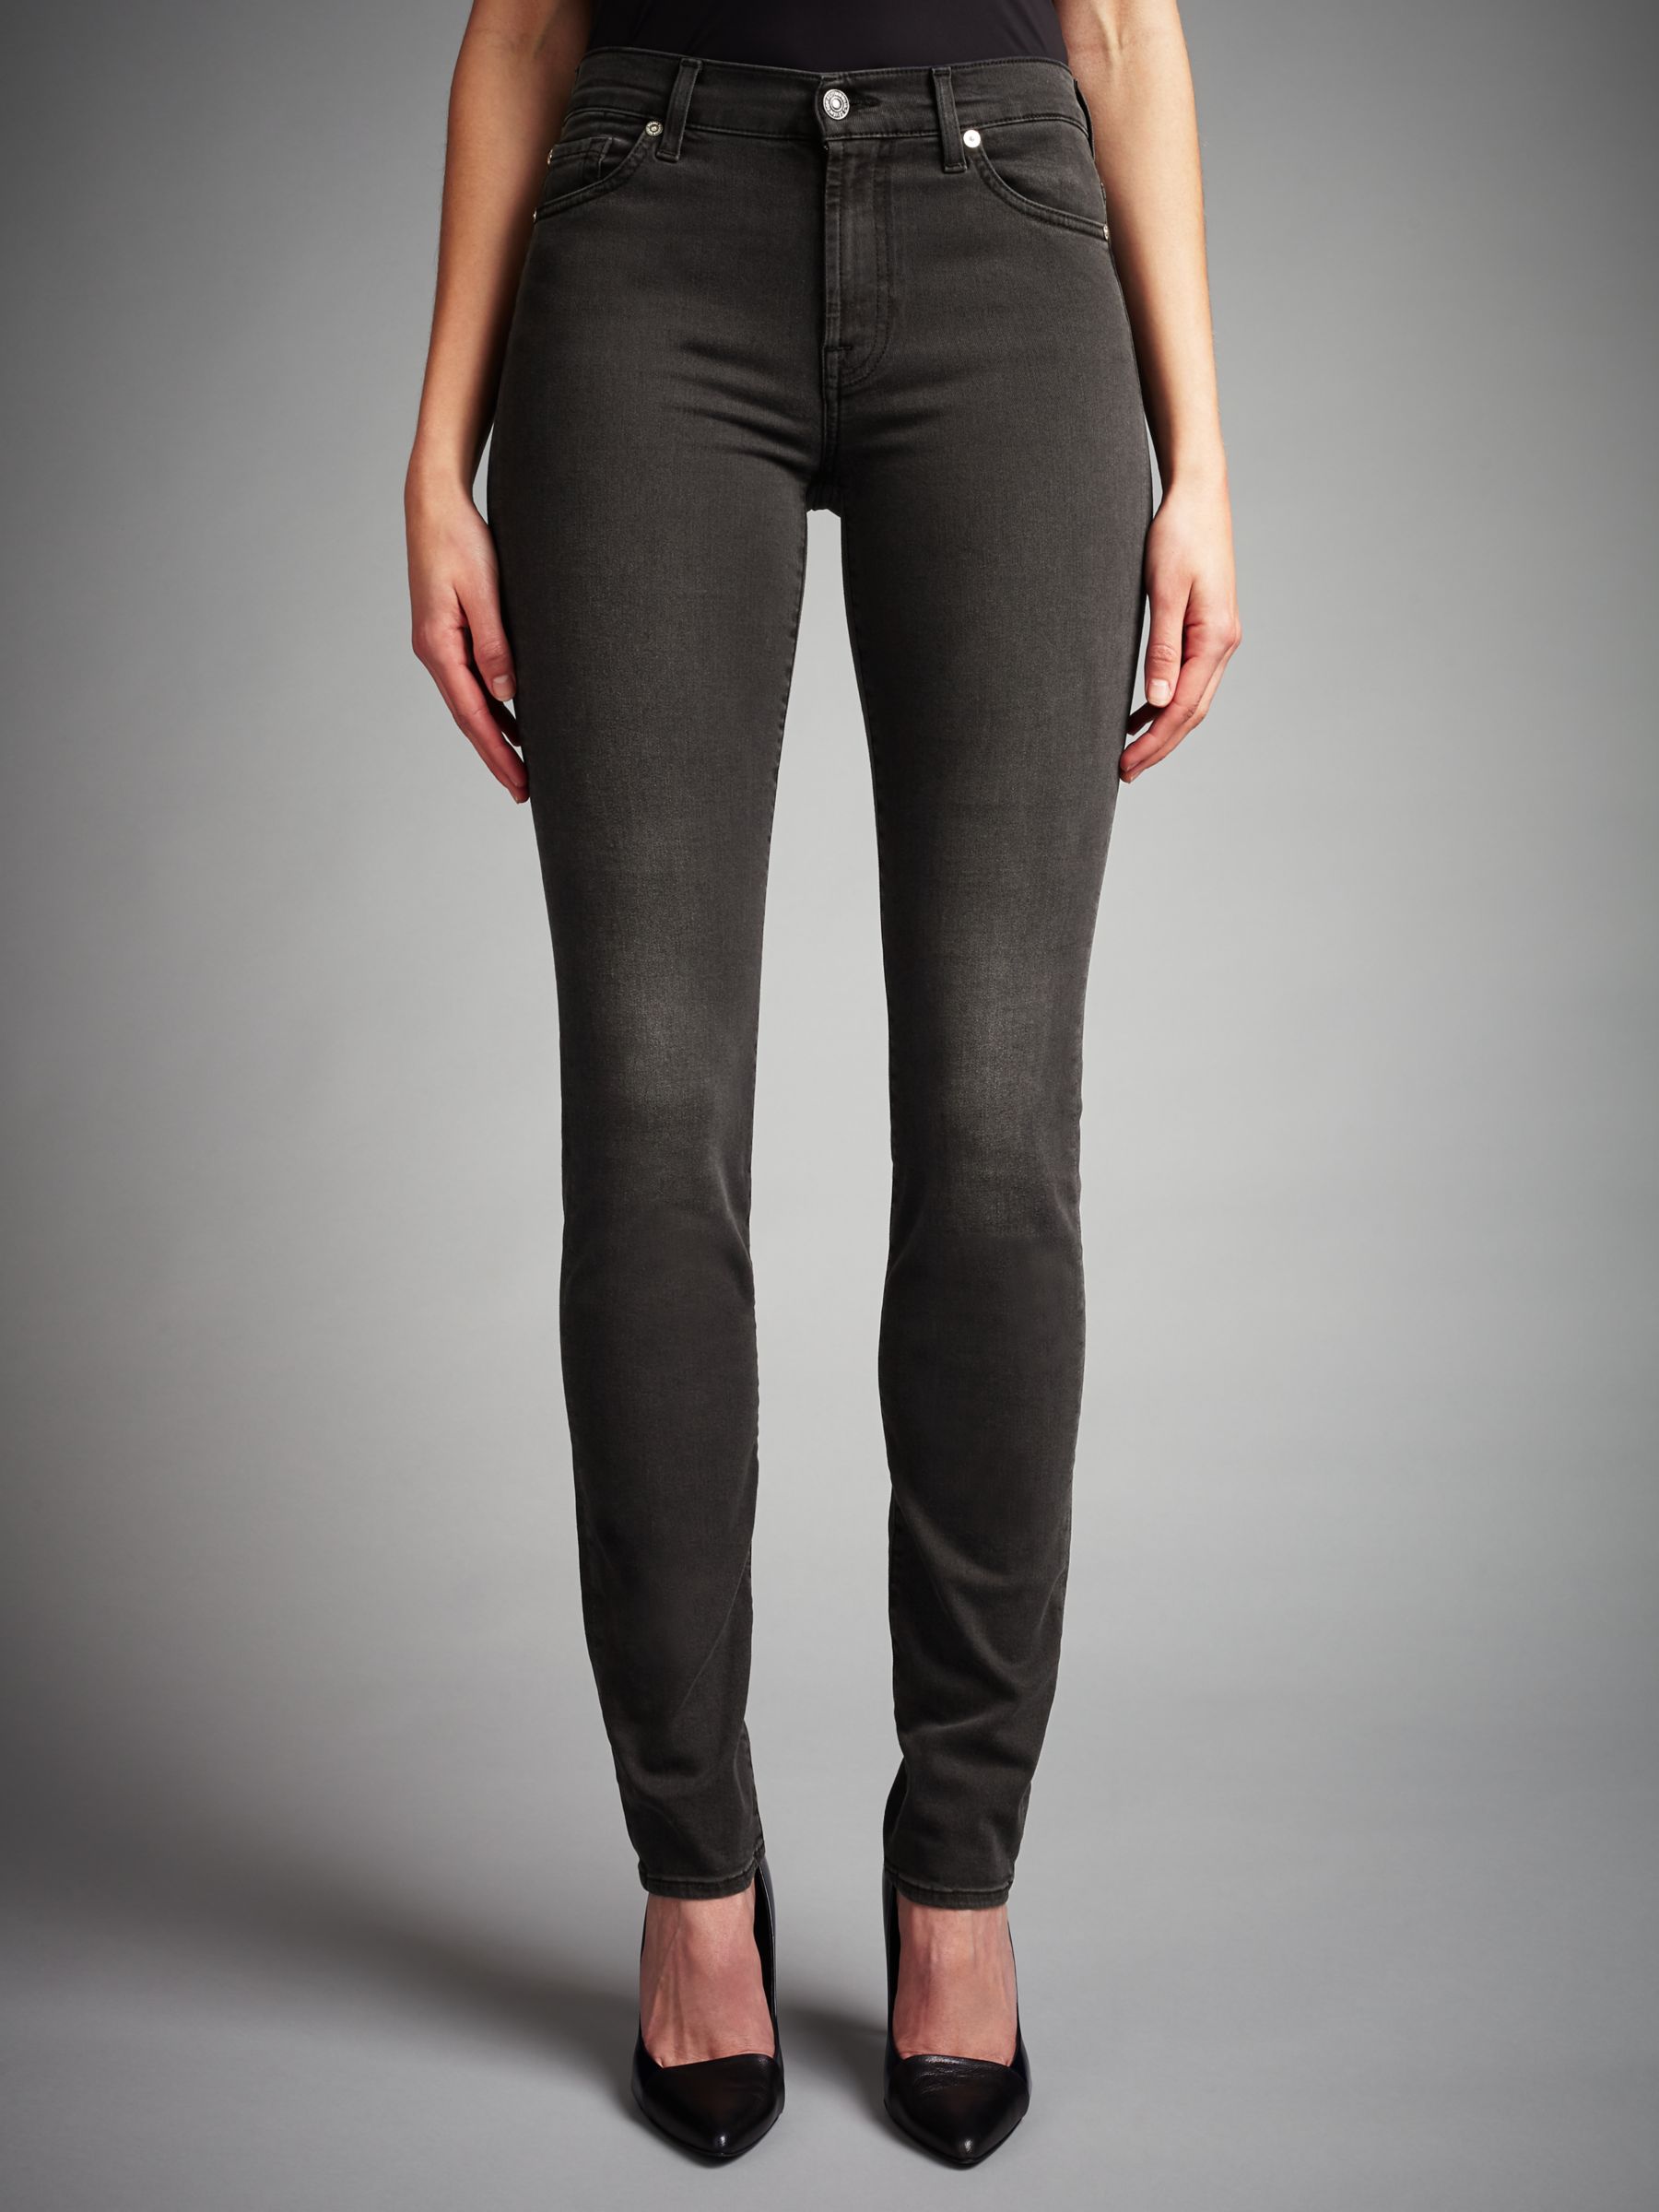 7 for all mankind rozie jeans